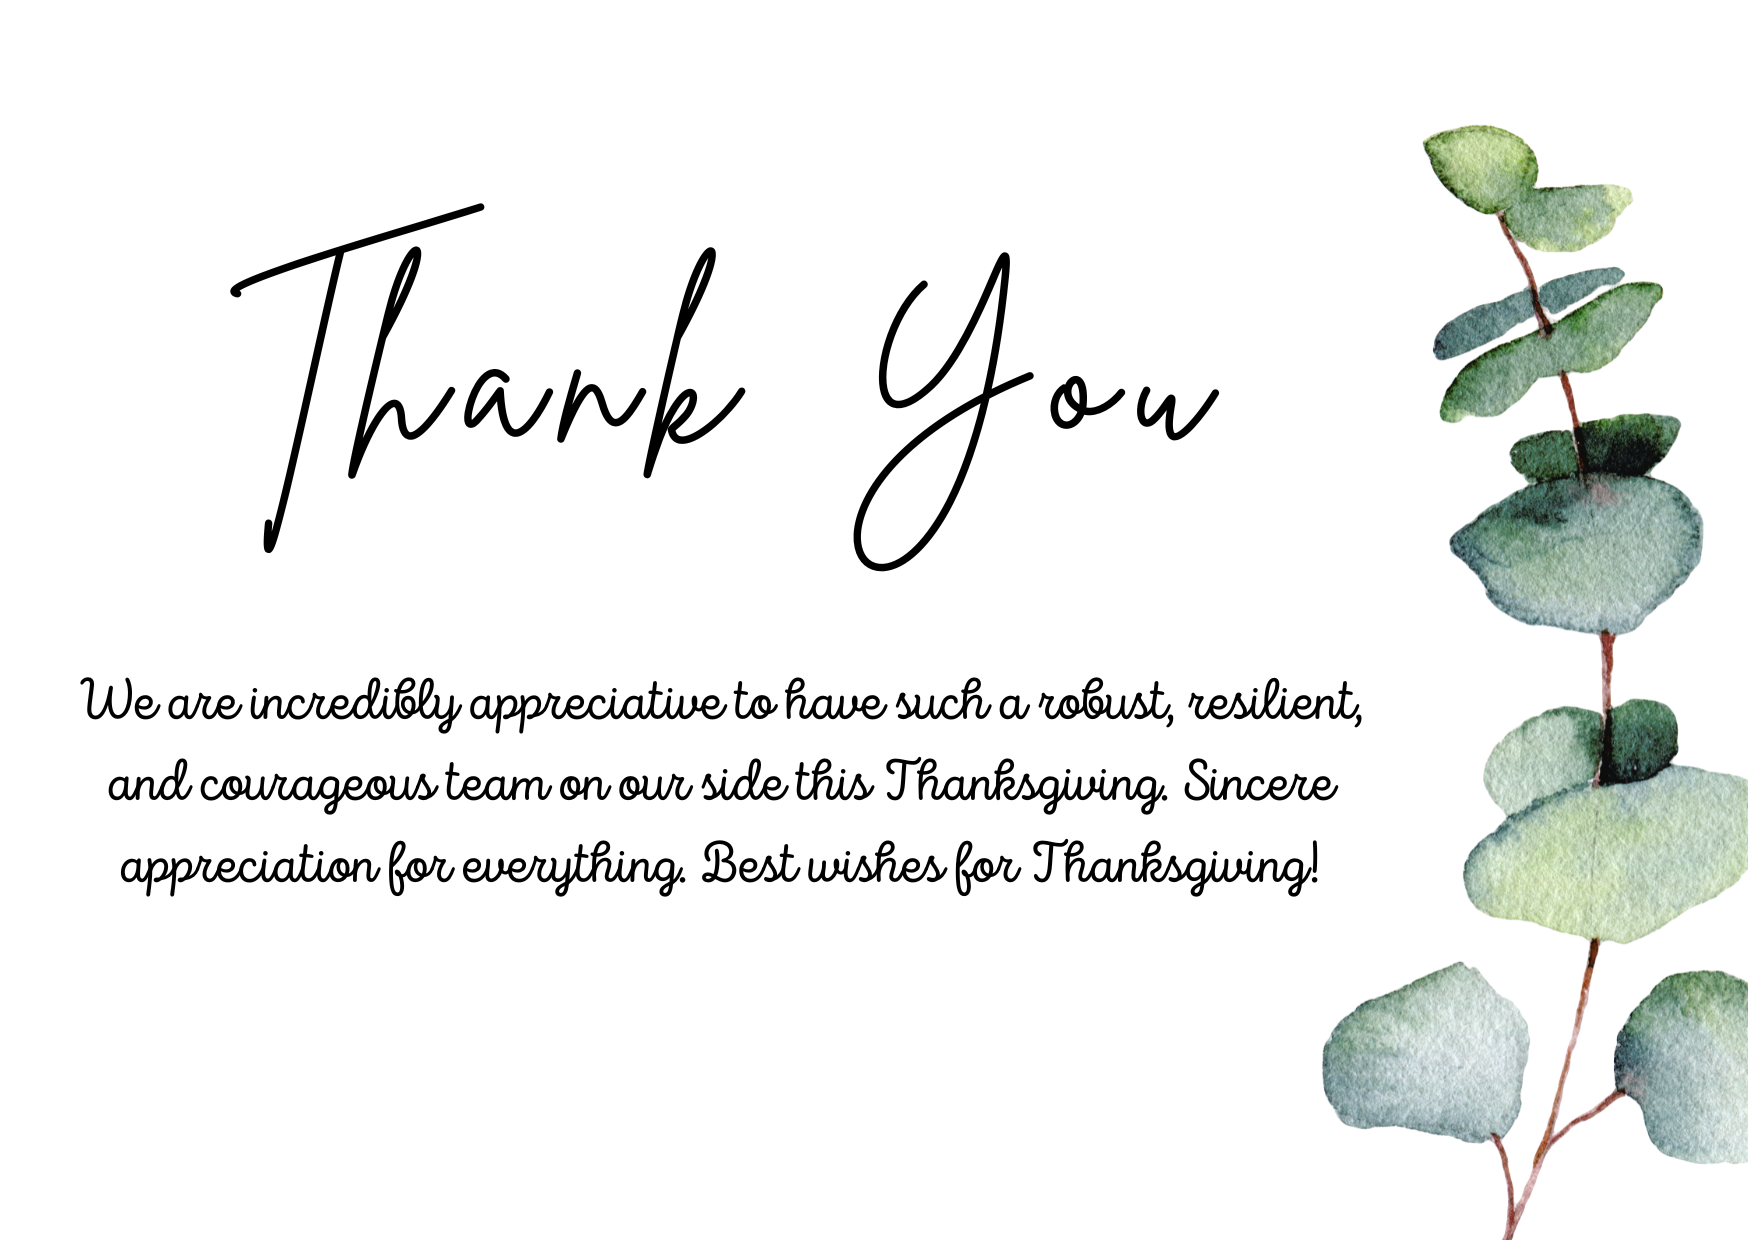 Downloadable ThankGiving Card for your Employees